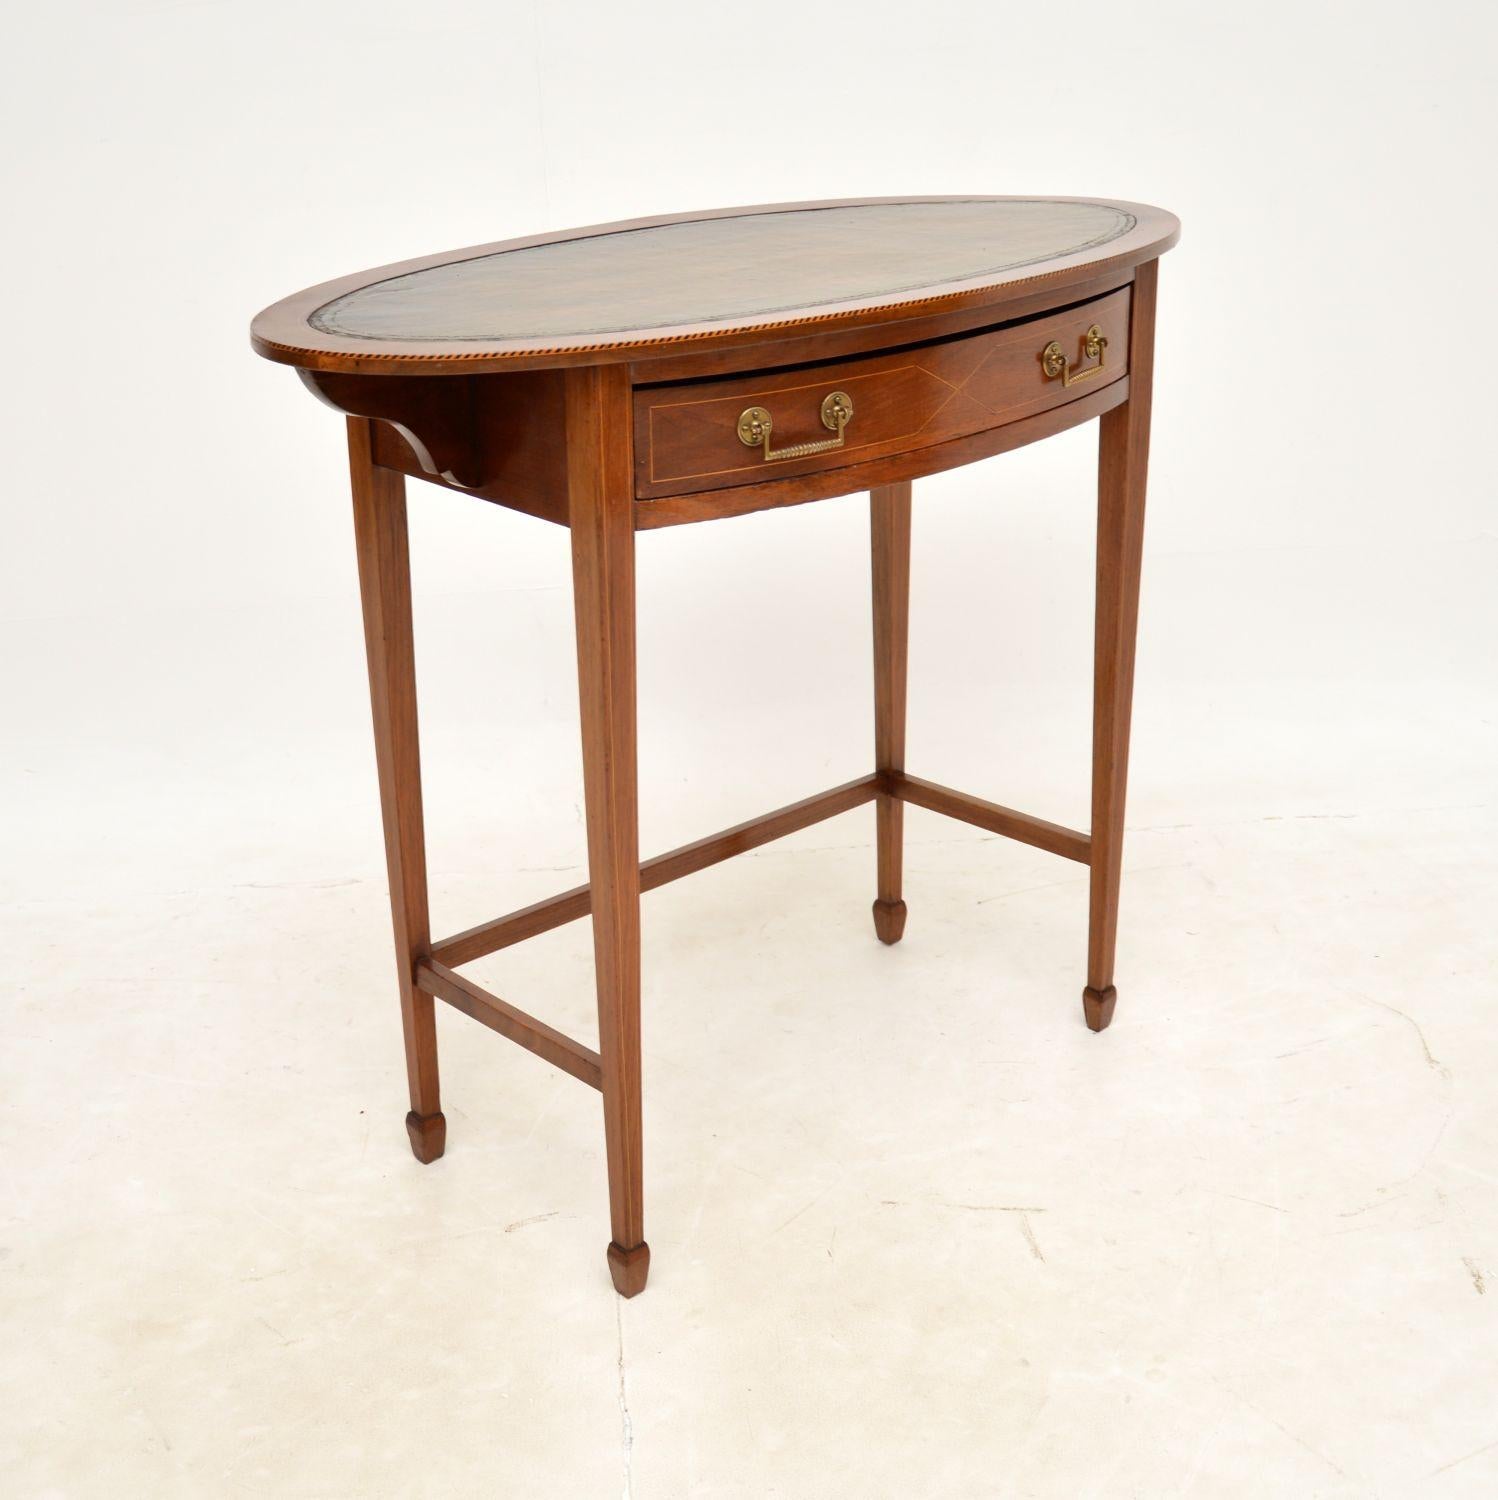 British Antique Edwardian Inlaid Writing Table / Desk For Sale